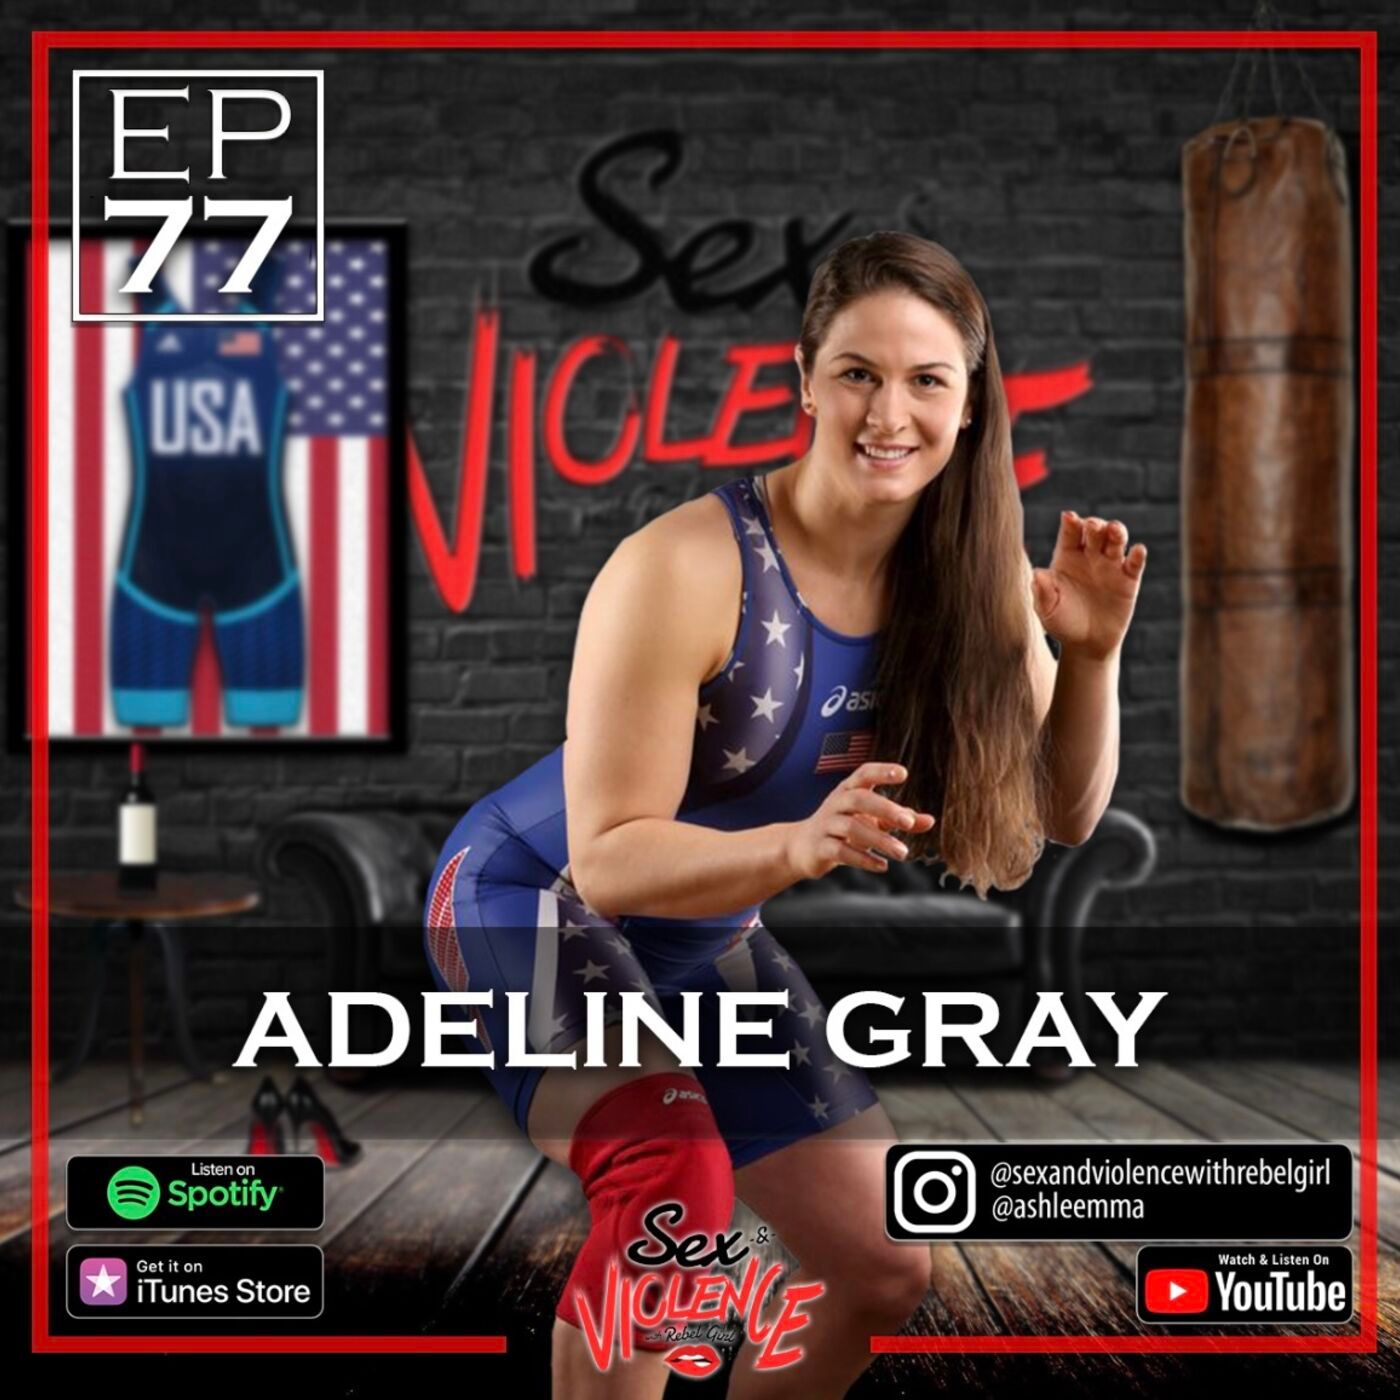 Ep.77 Adeline Gray – Sex And Violence With Rebel Girl – Podcast